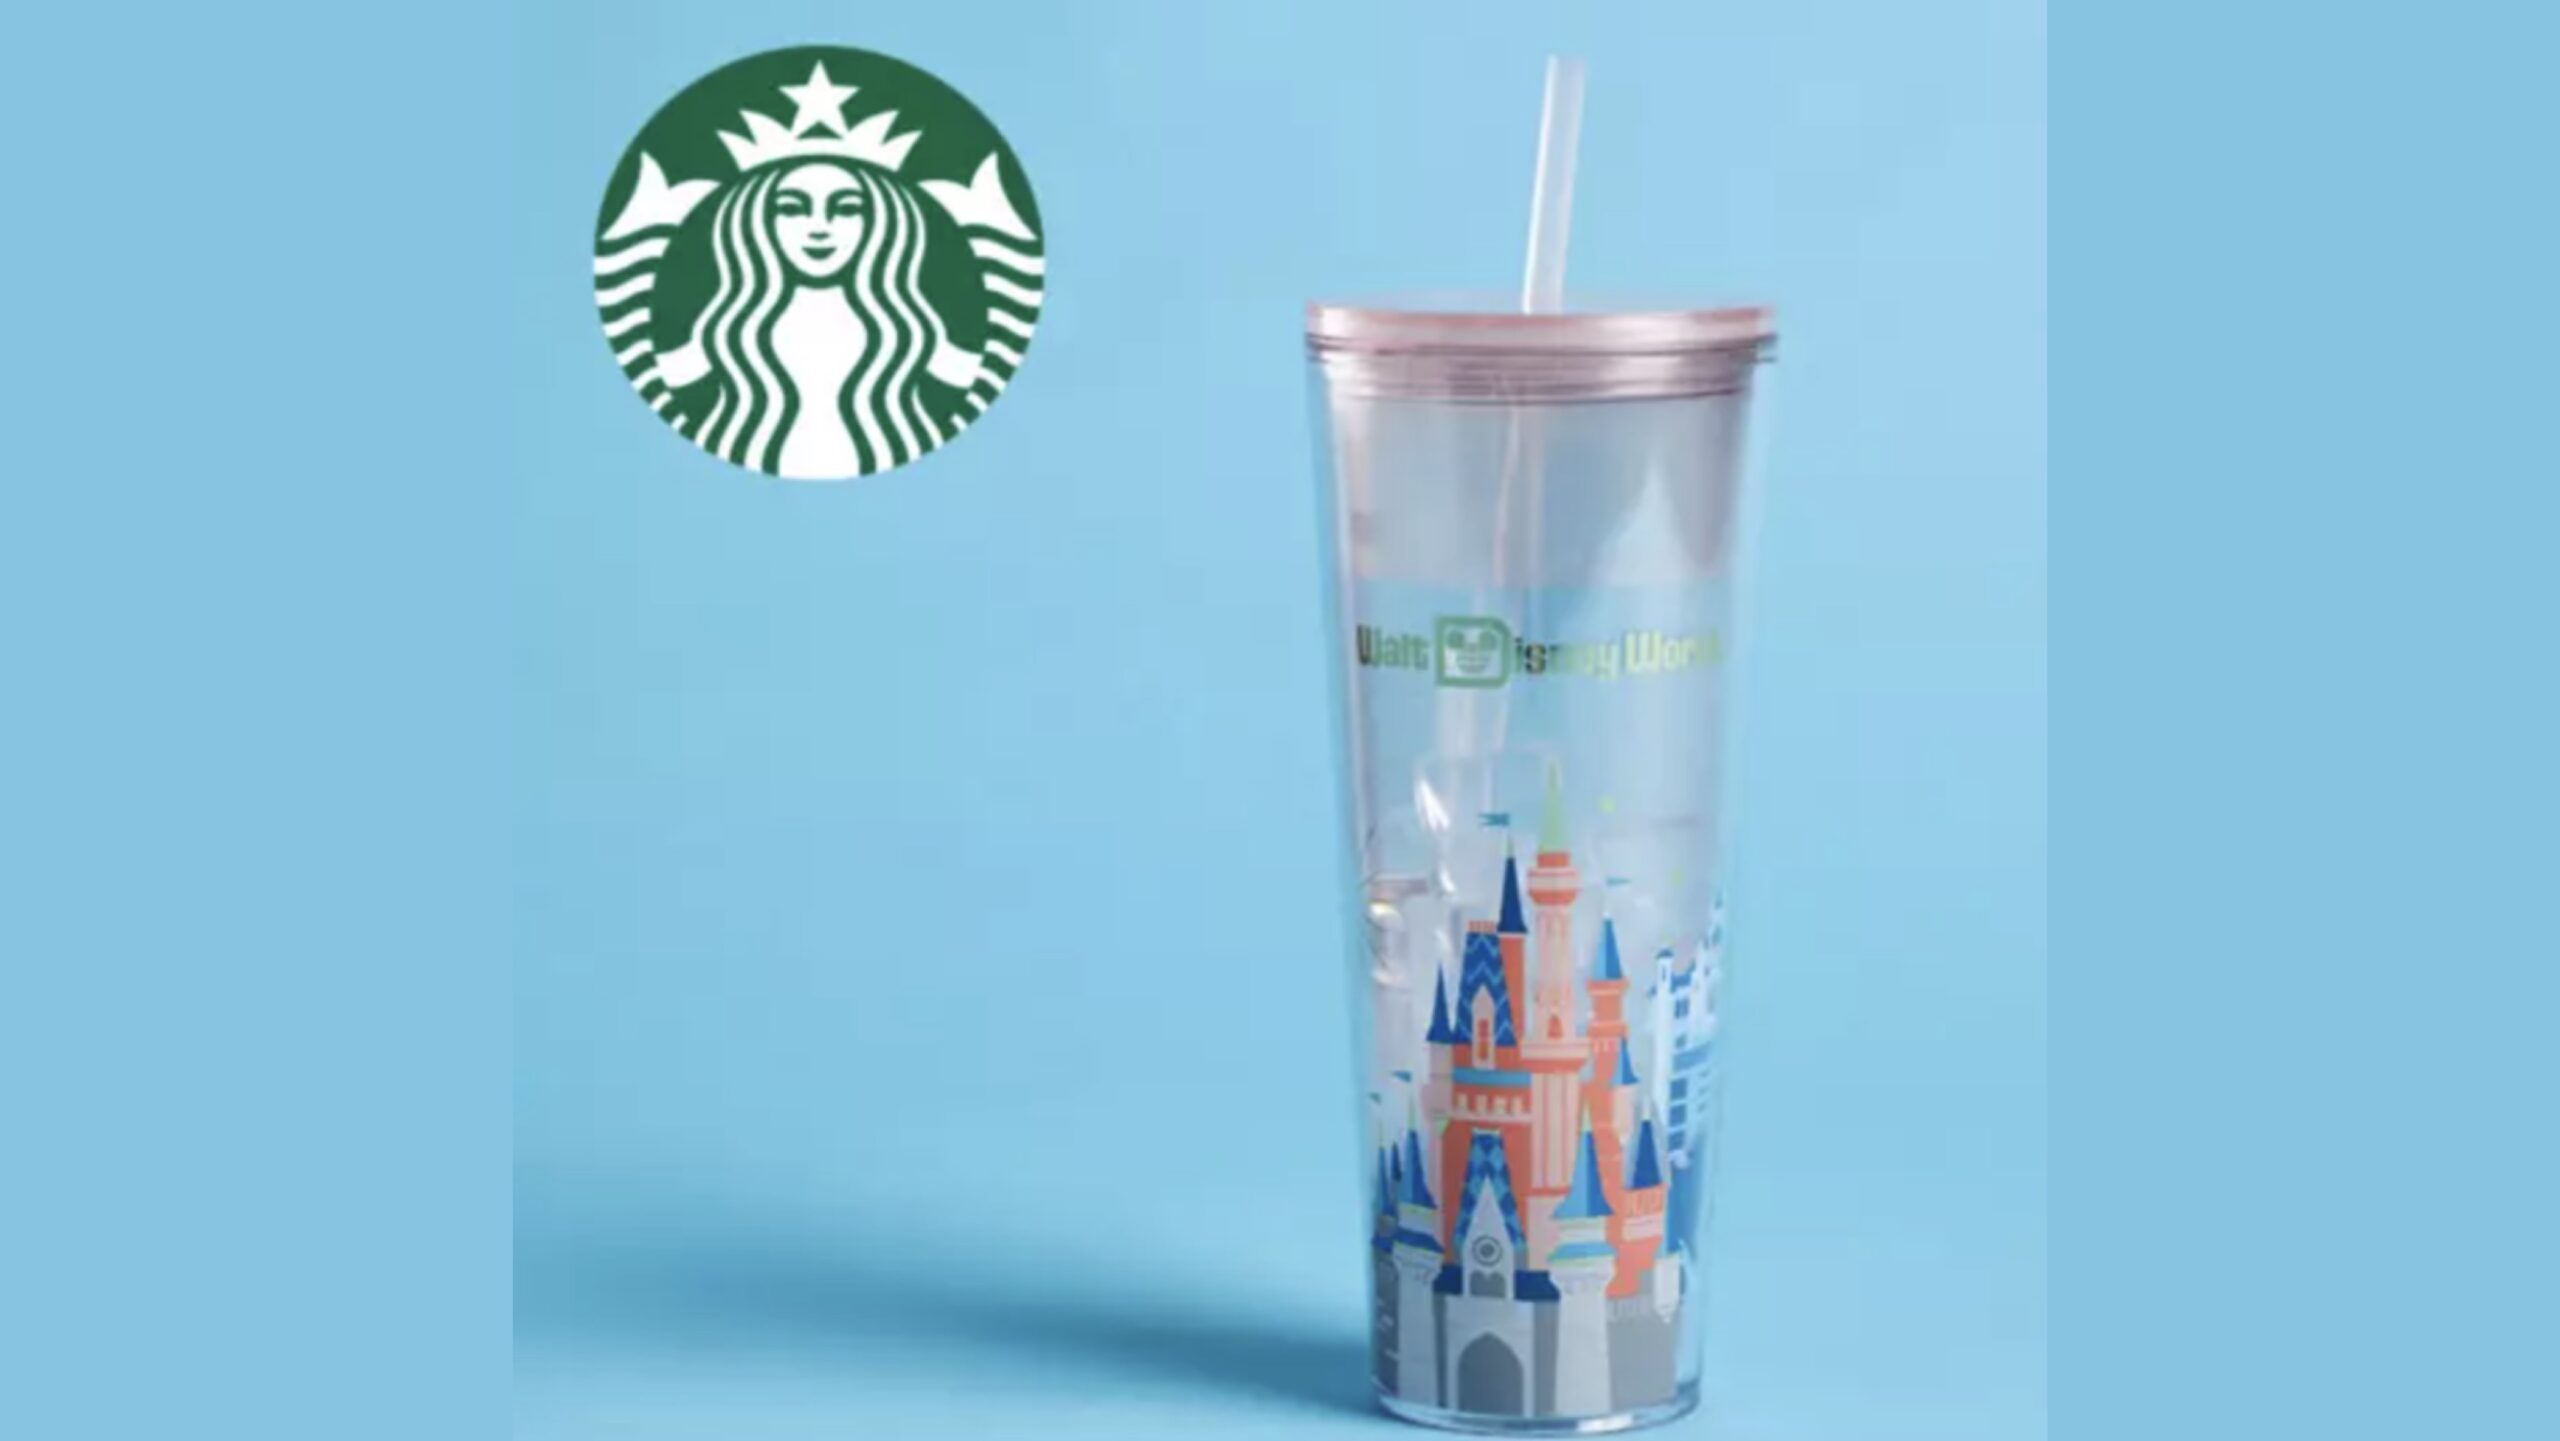 PHOTOS: This NEW Disney Starbucks Tumbler Is Decked Out in